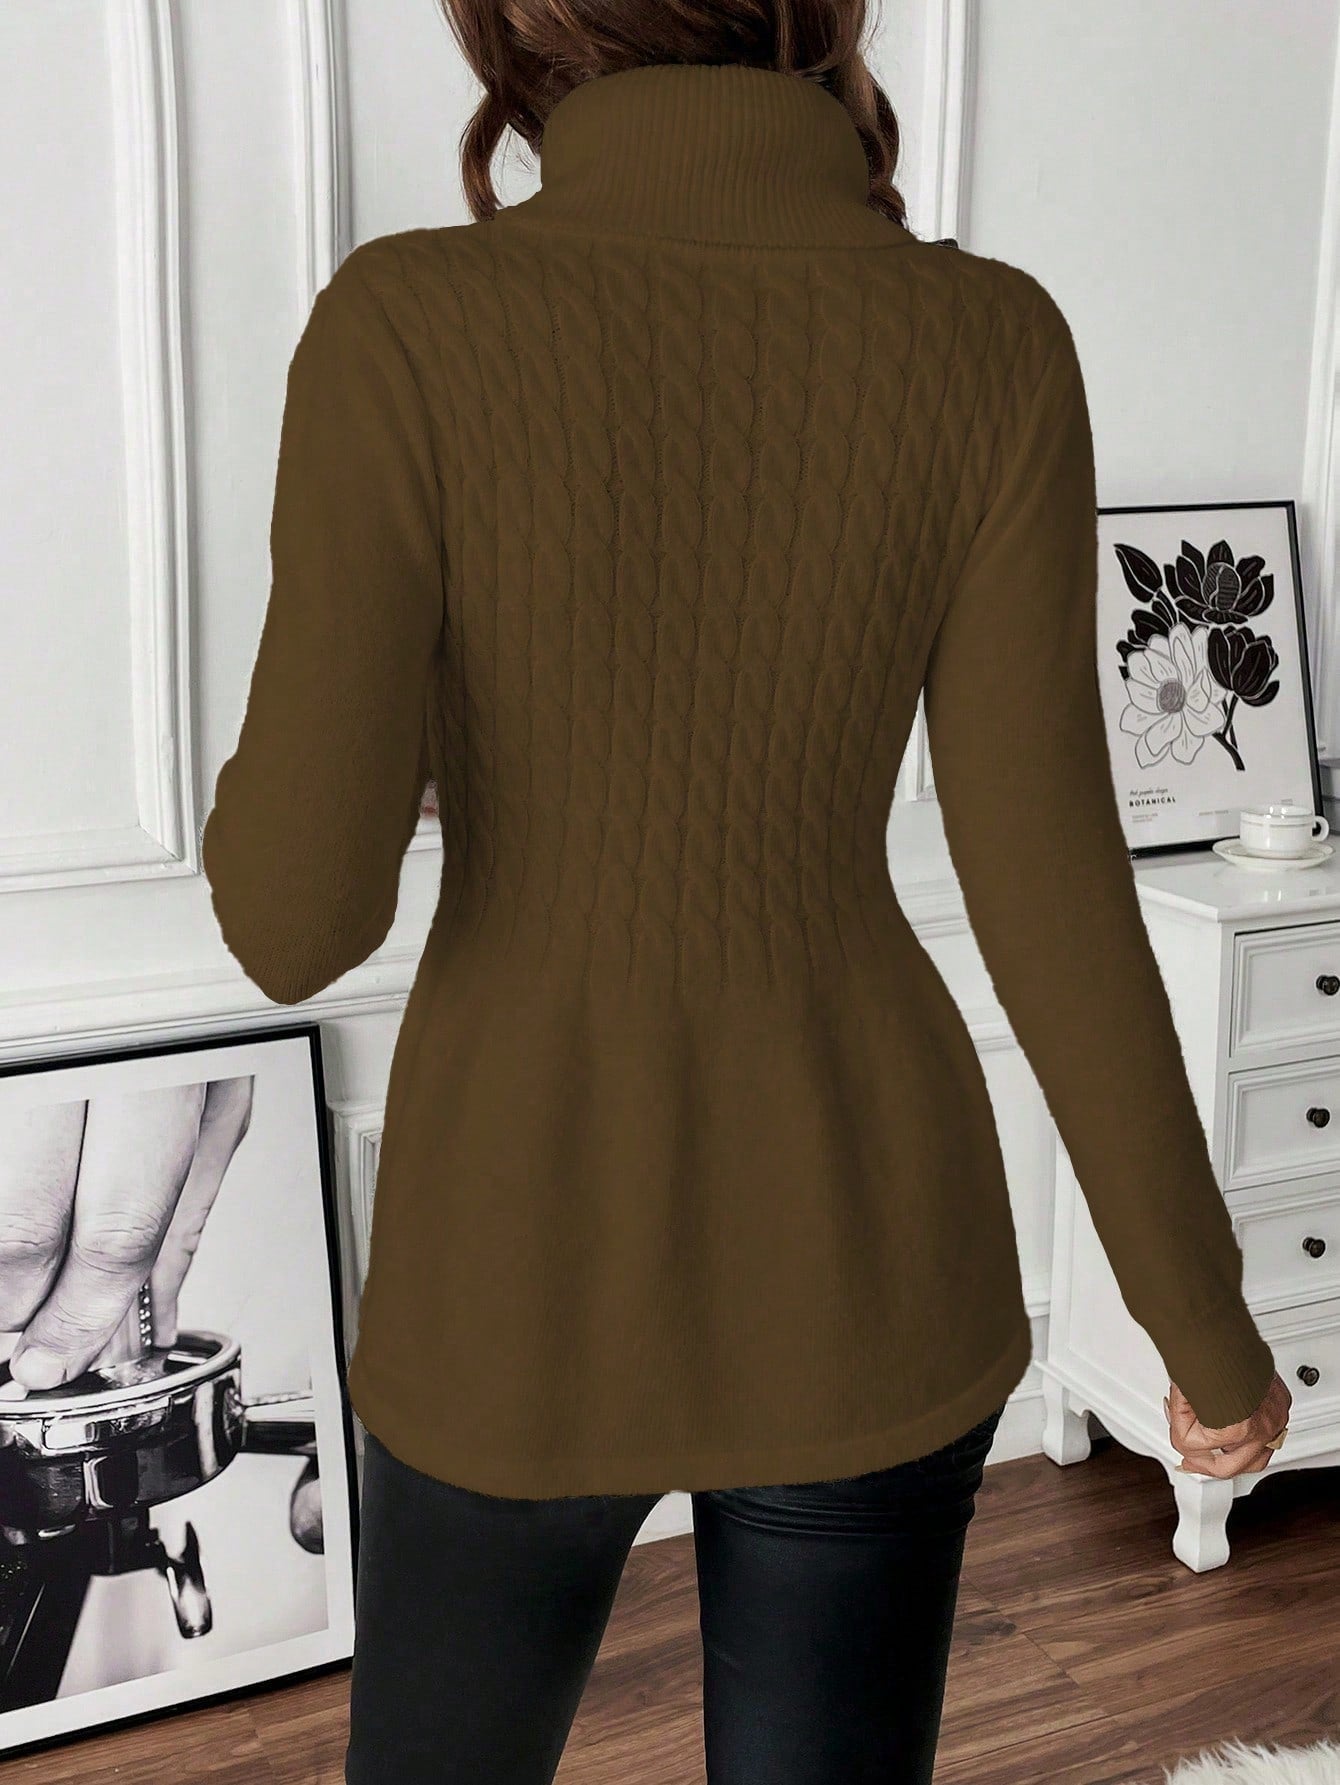 Essnce Women's Simple Solid Colored High Neck Sweater